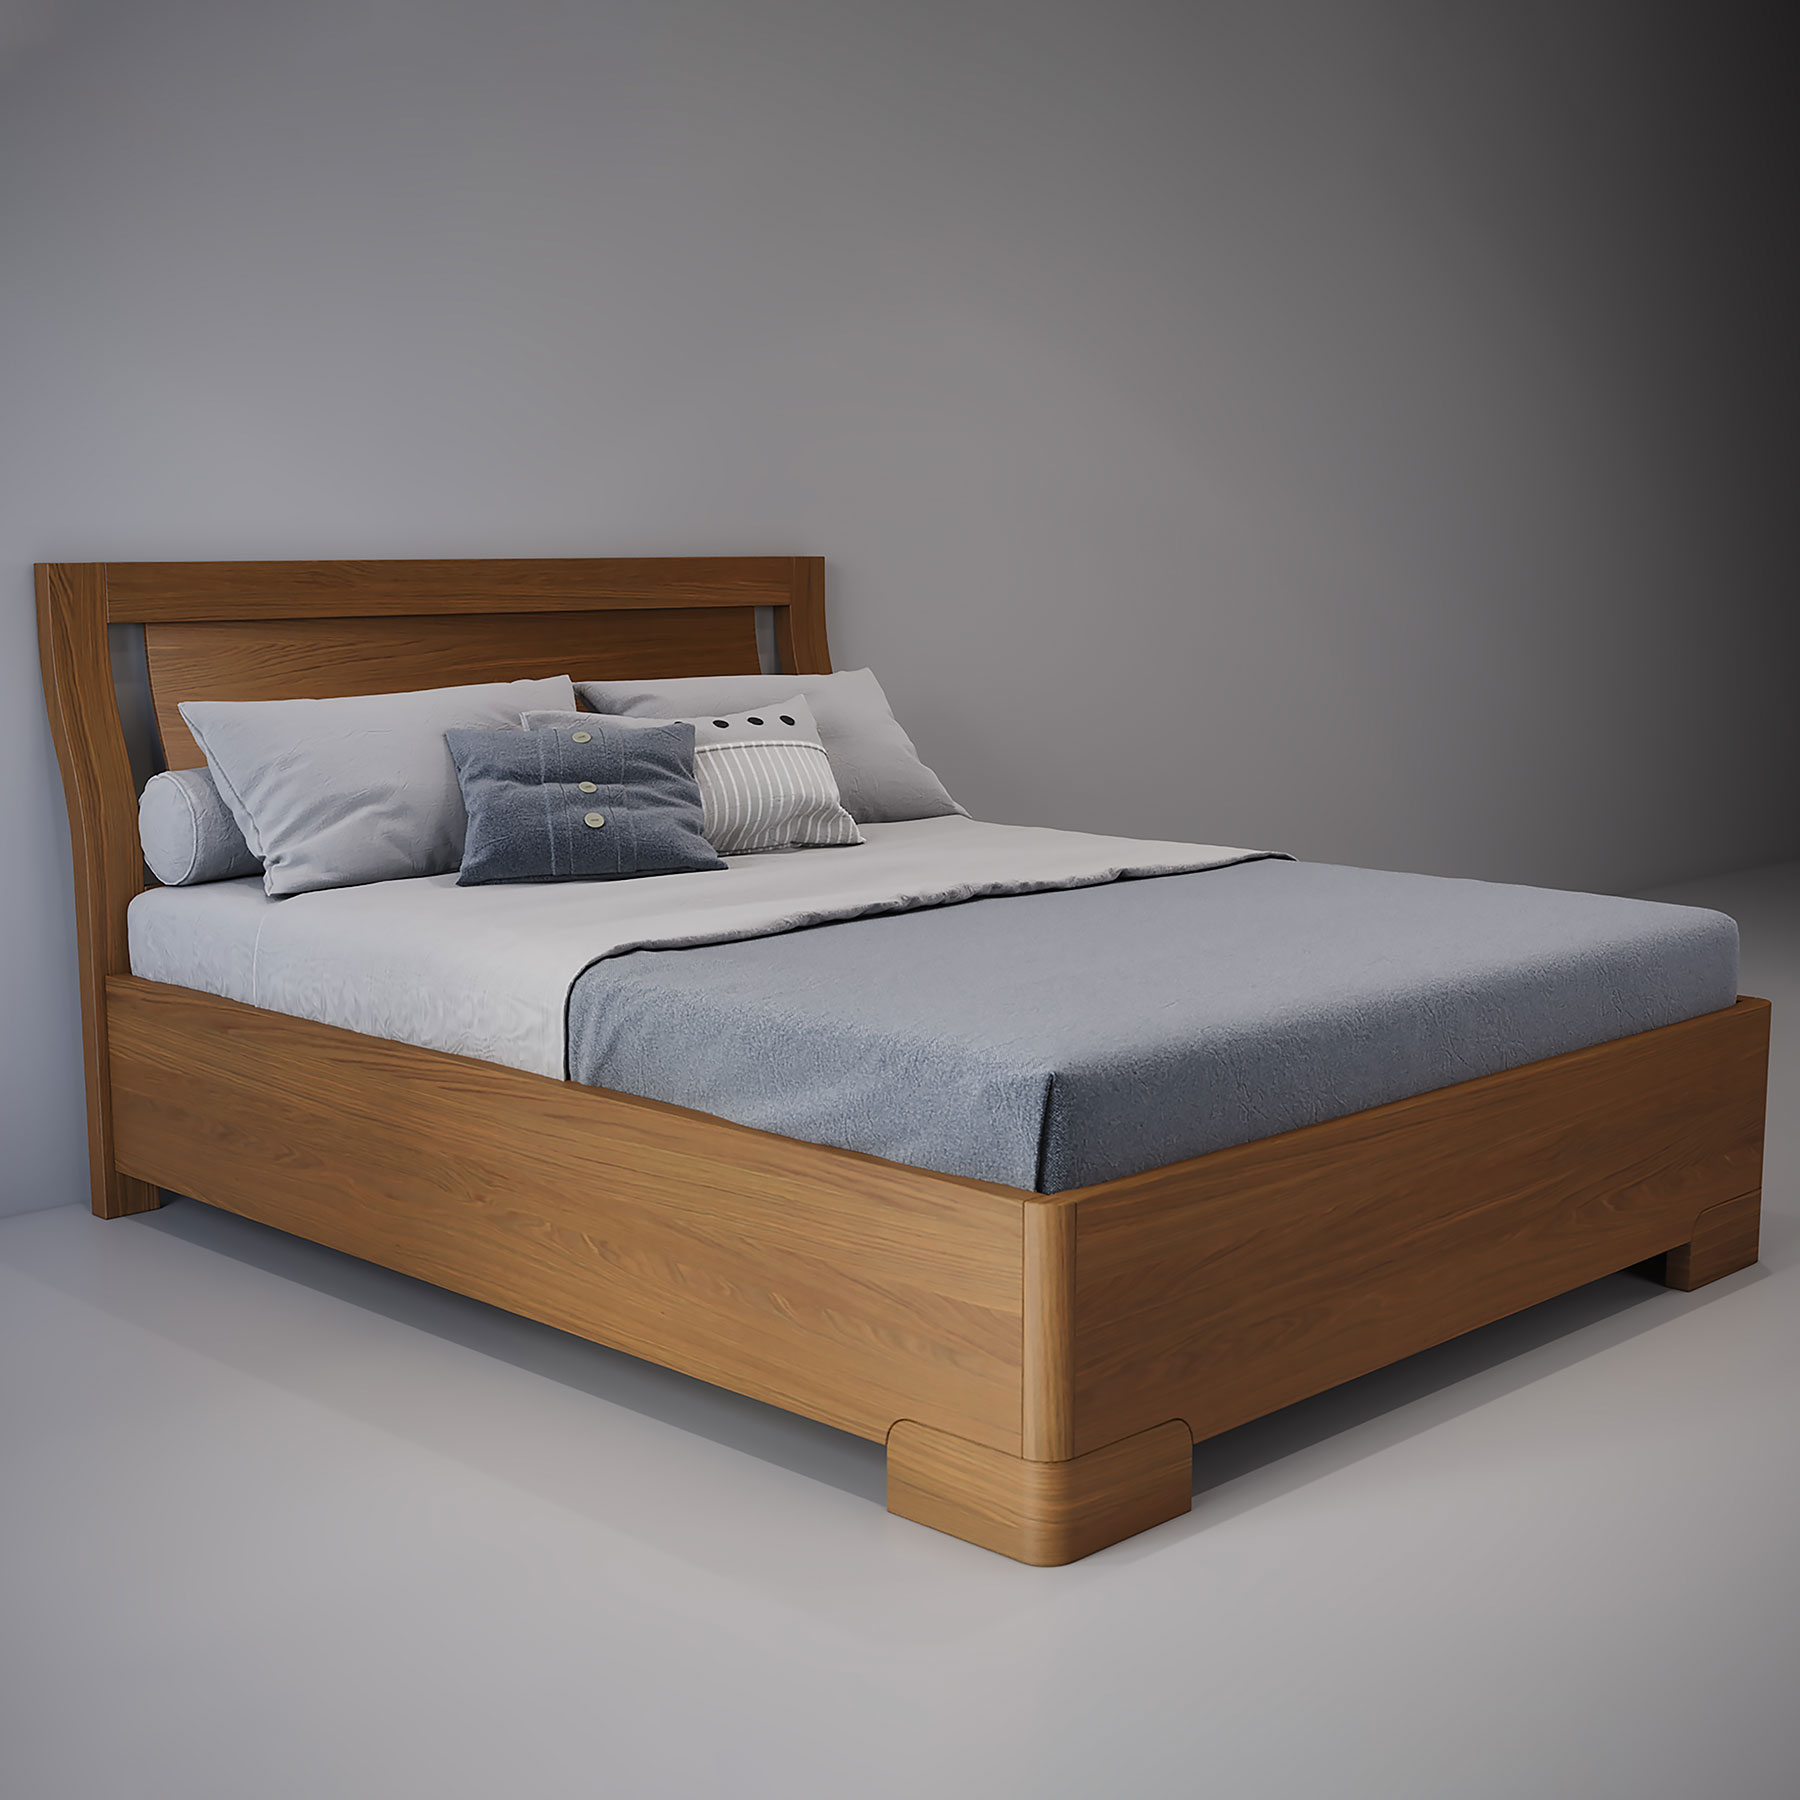 Double bed from the Verona collection 3